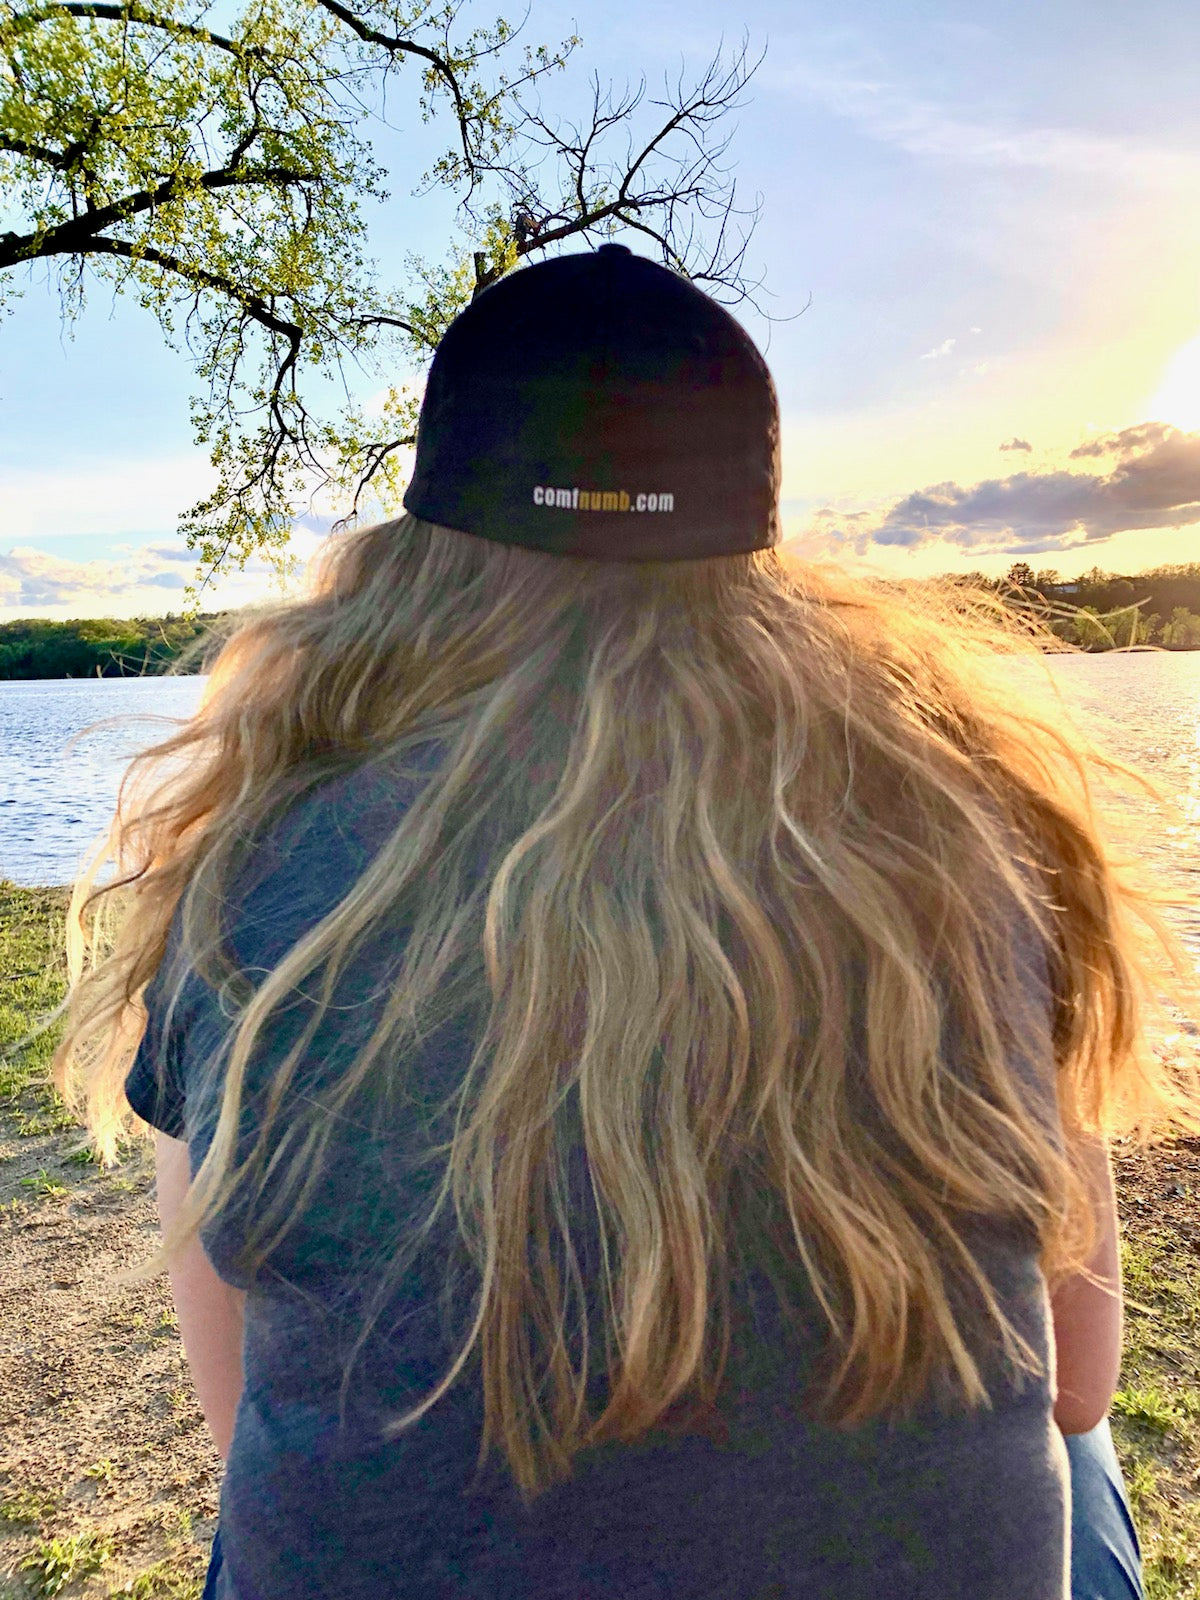 Watching the sunset by the St Croix River in Hudson, Wisconsin with a Cool Comfortably Numb baseball cap for women.